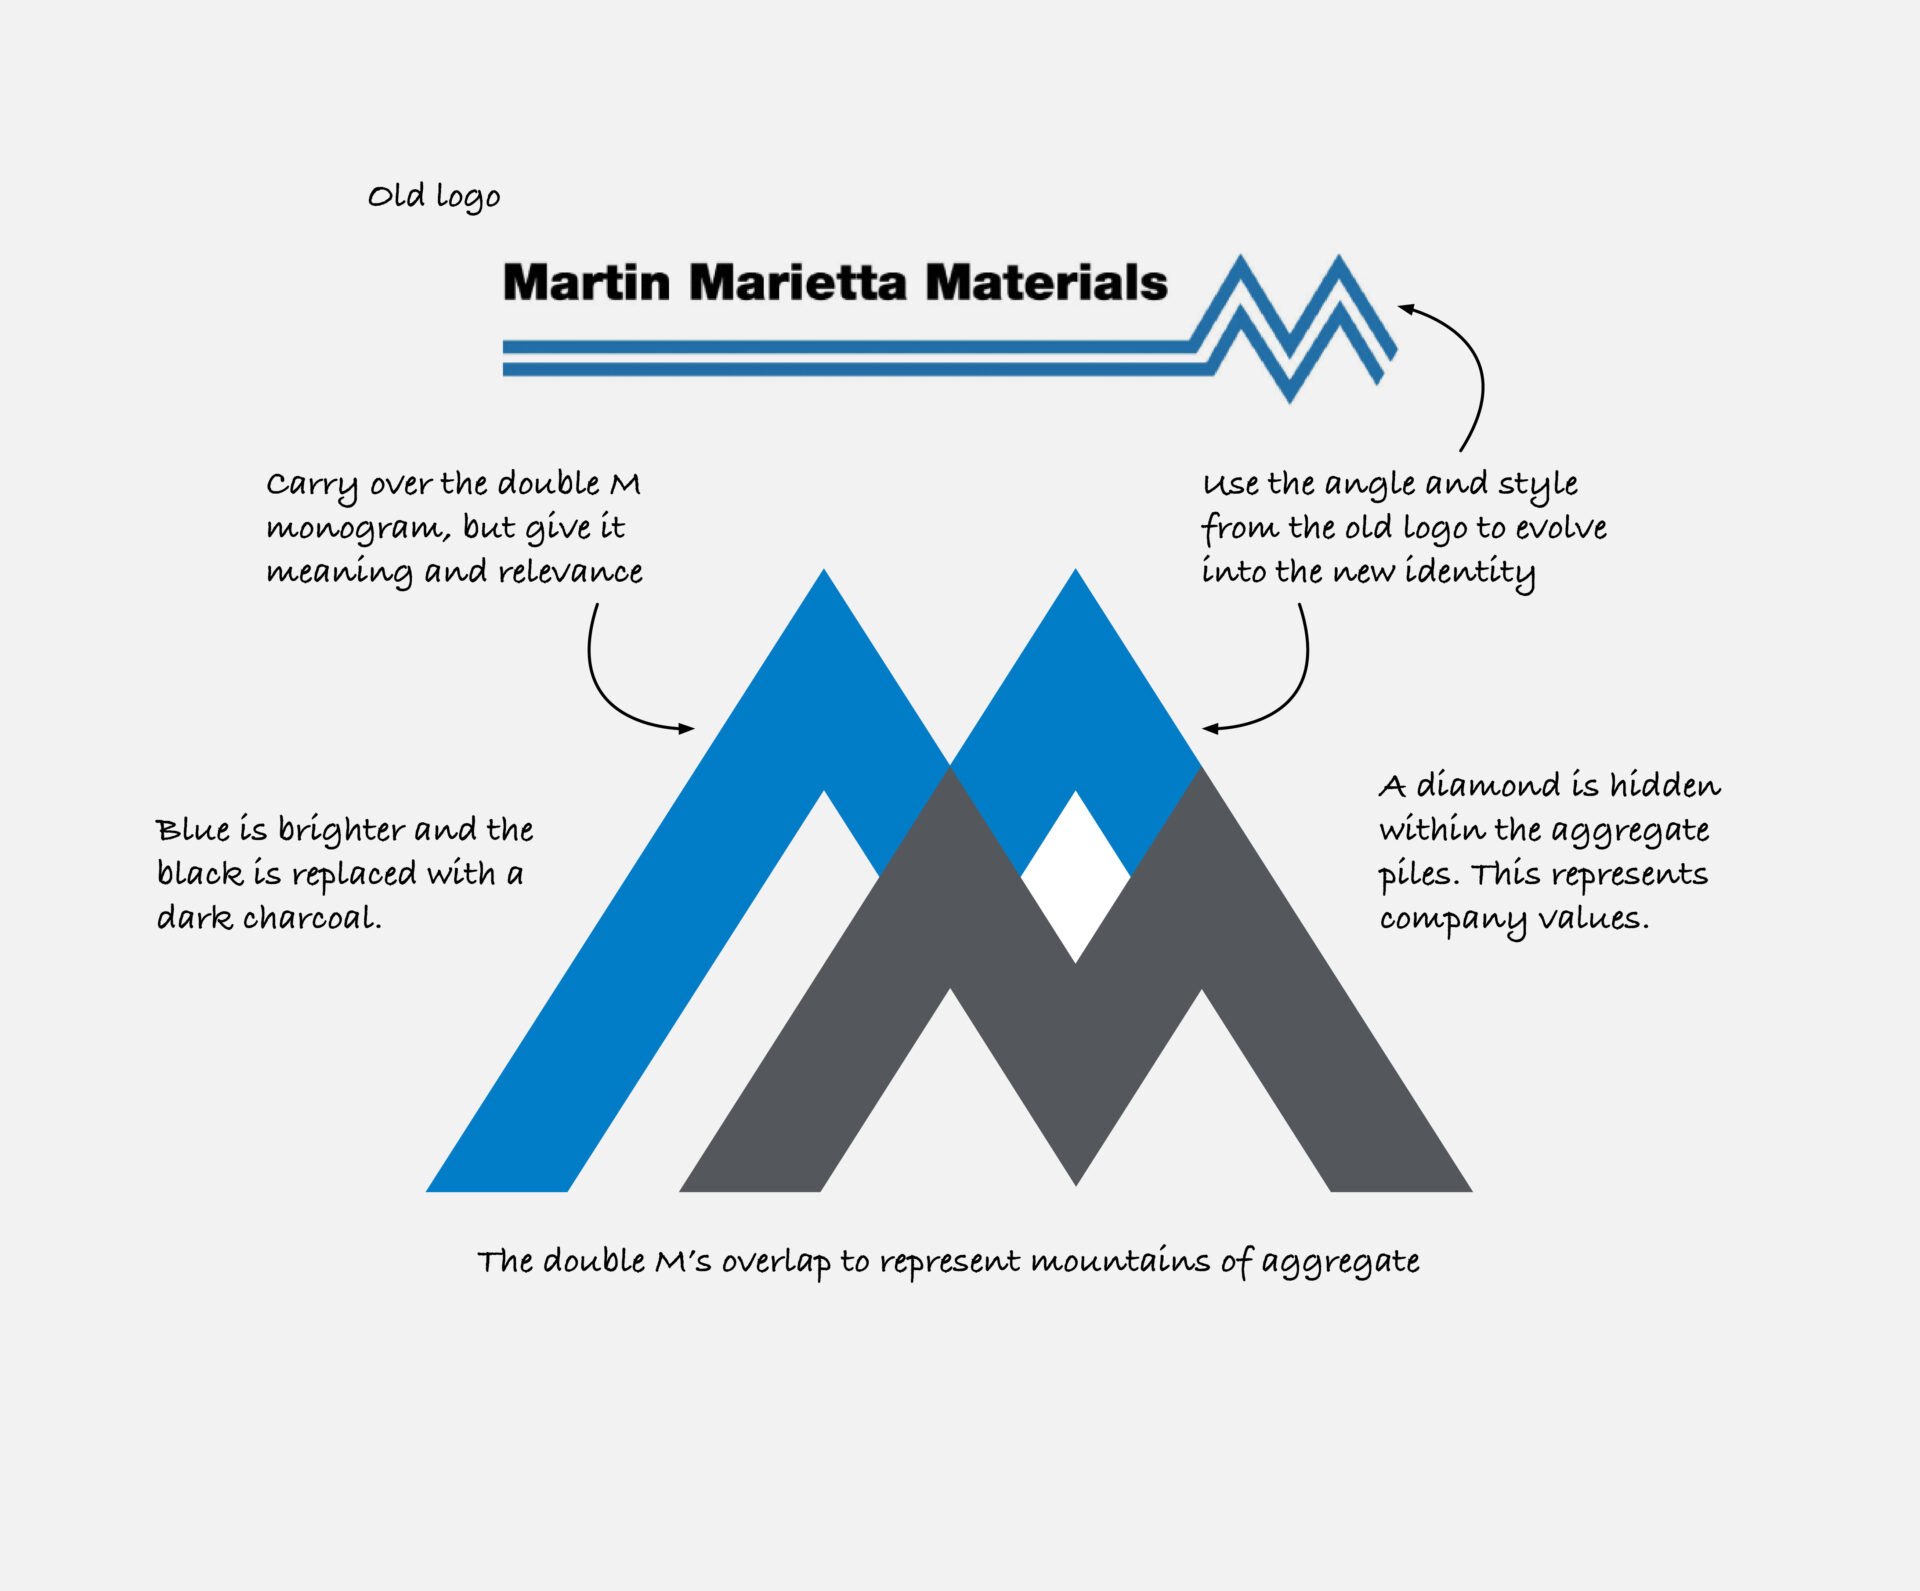 An image explaining the anatomy of the Martin Marietta icon used in the brand identity